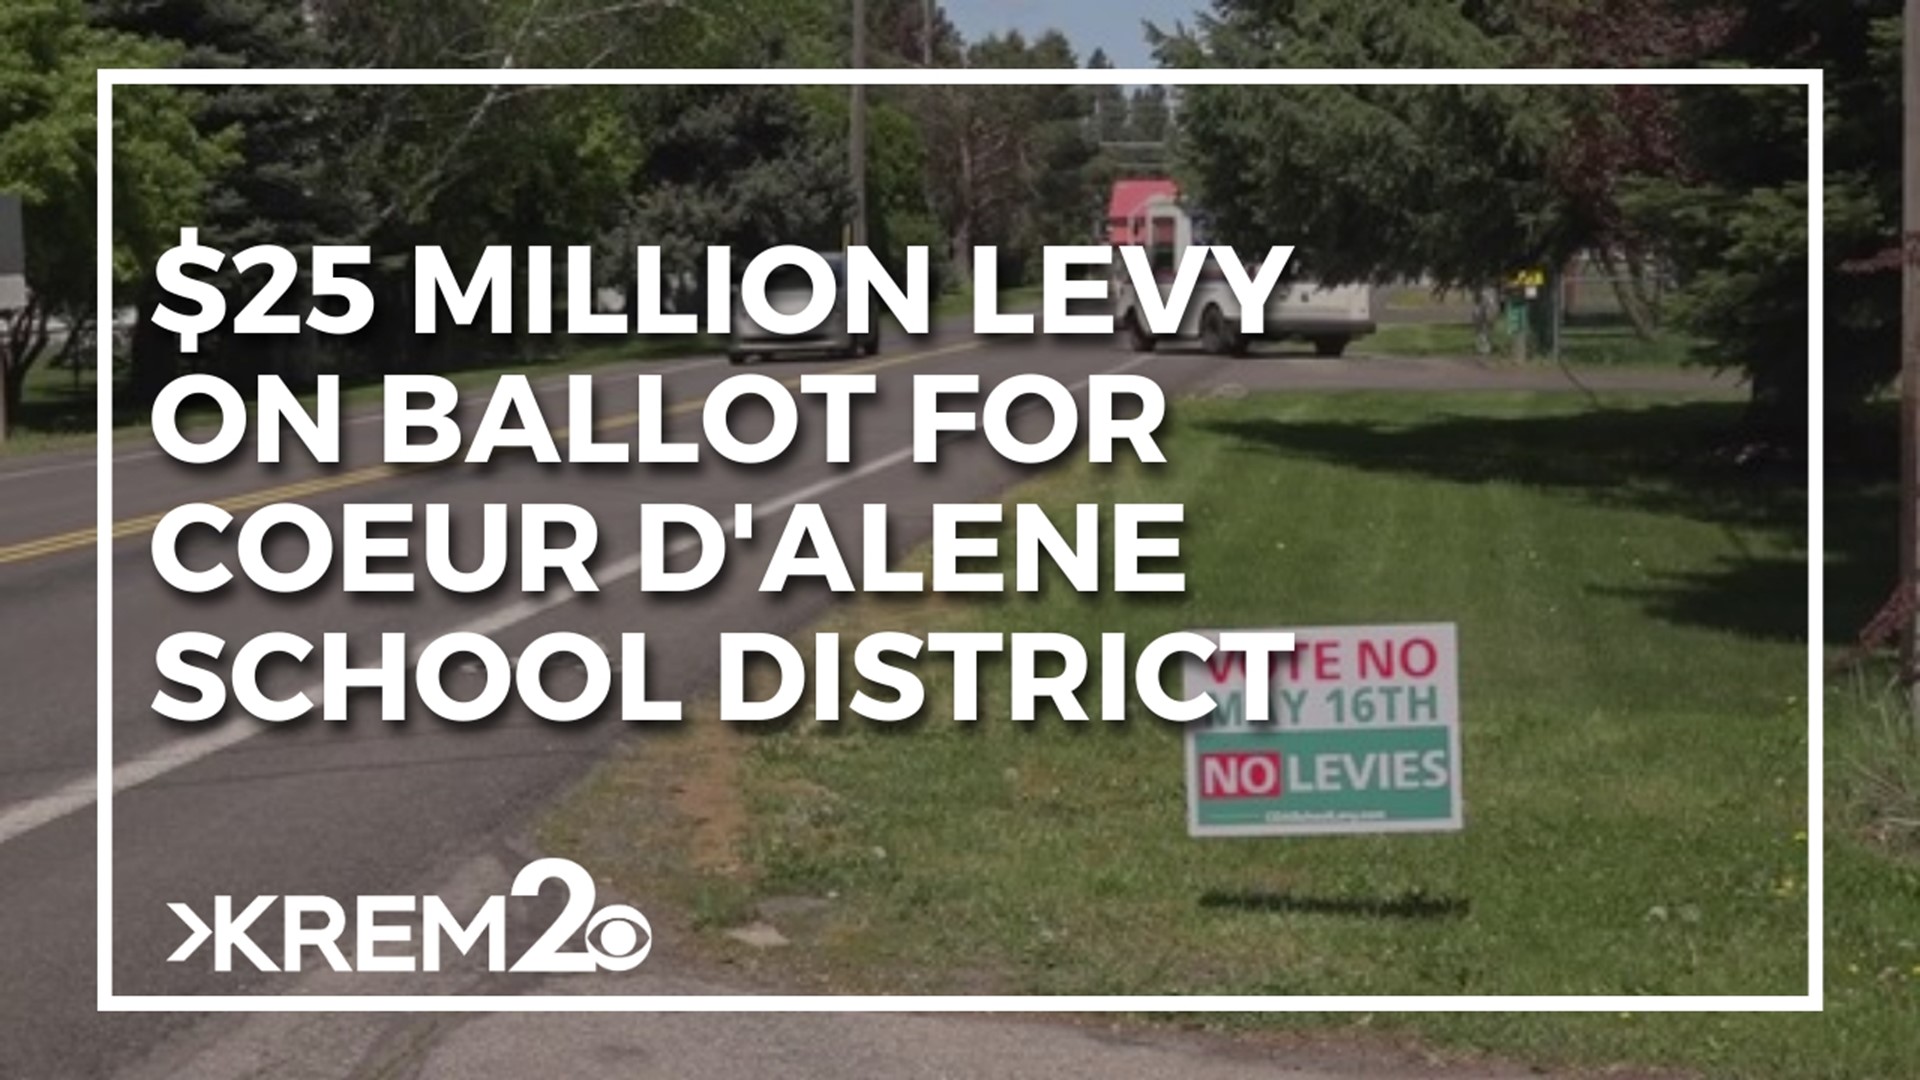 People in support of the levy say it would be "devastating and detrimental" if it fails. Tuesday's vote is a second attempt at passing the $25 million levy.